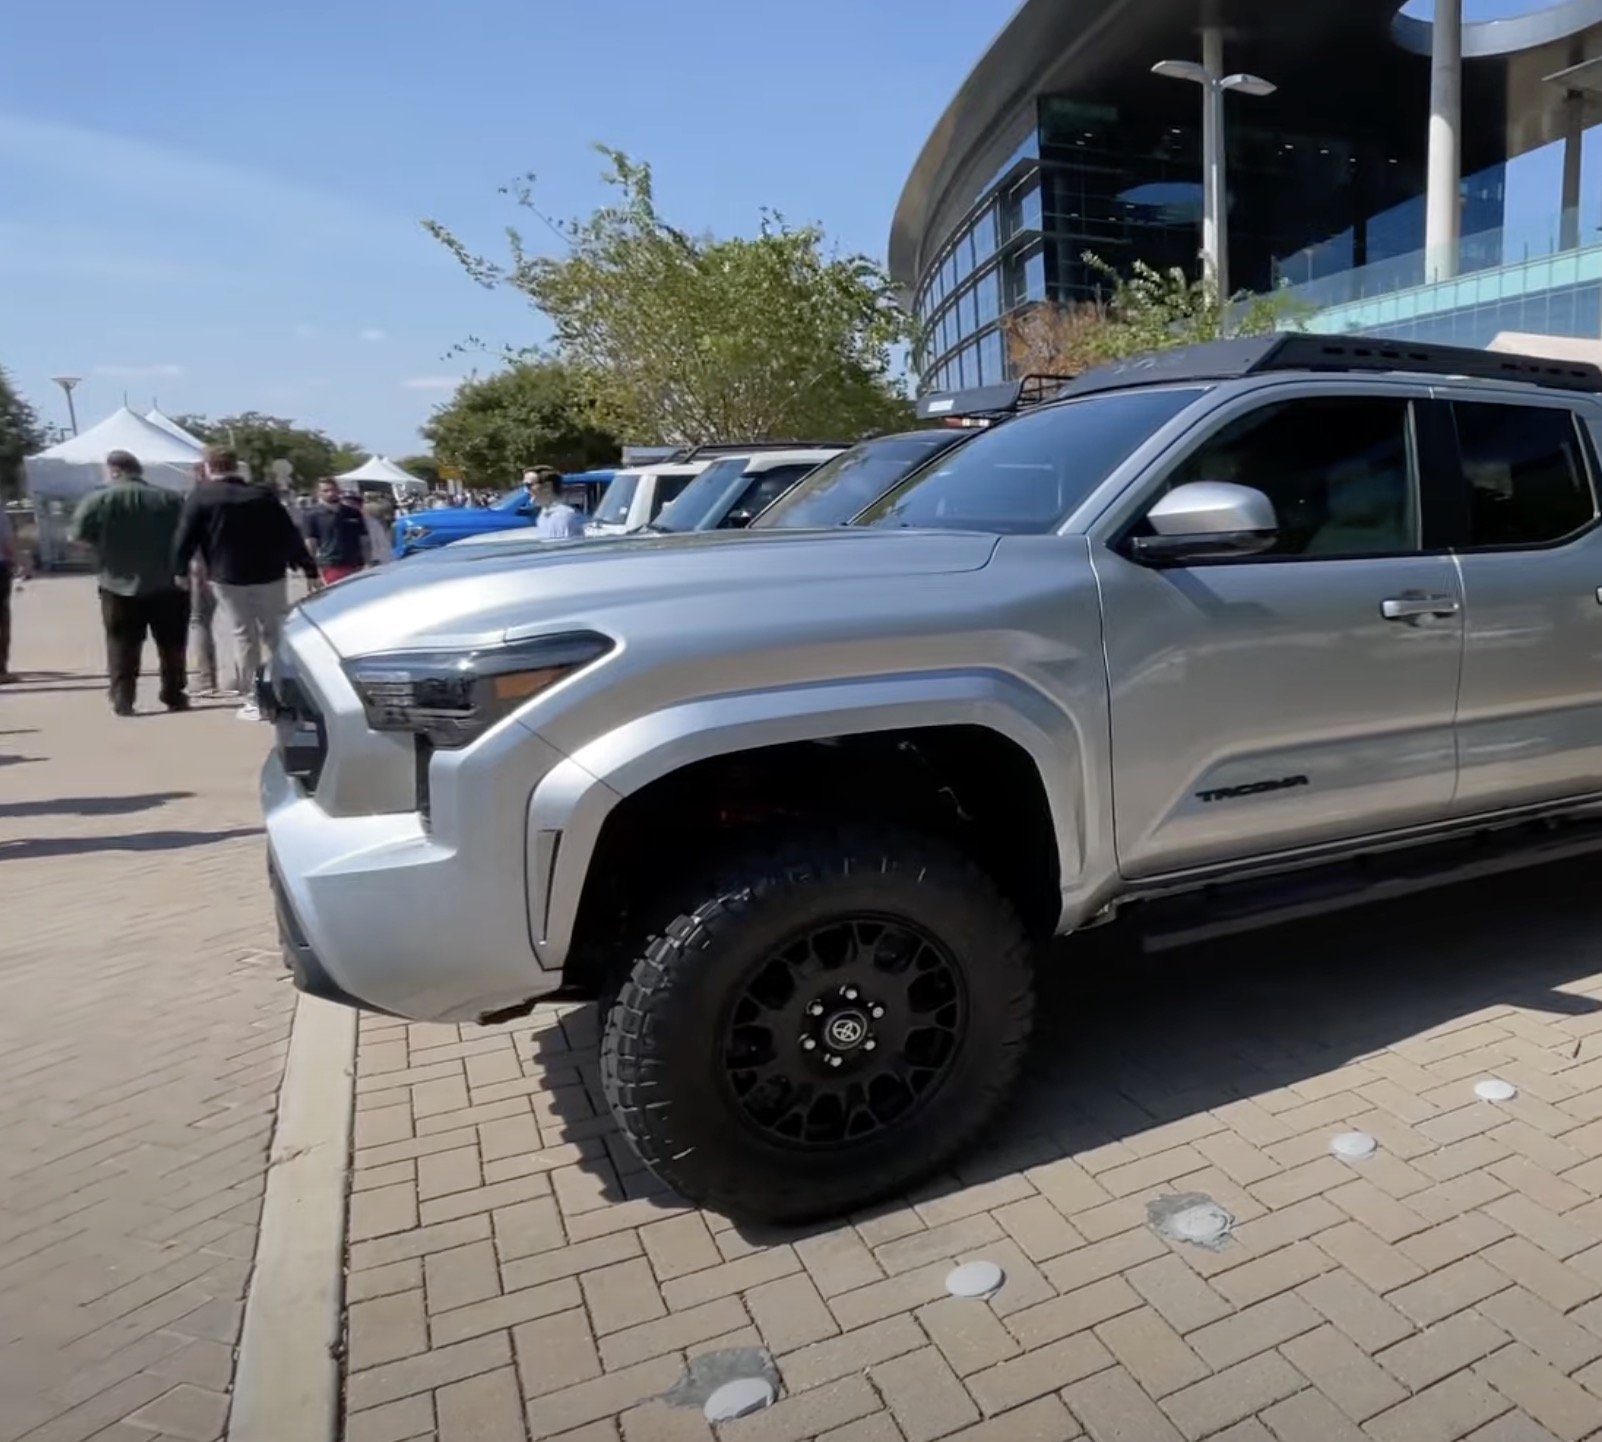 2024 Tacoma 2024 Tacoma SR5 - Specs, Price, MPG, Options/Packages, Features & Photos Celestial Silver 2024 Tacom SR5 TRD Lift Kit 2.5 2.0 inches springs struts build 2